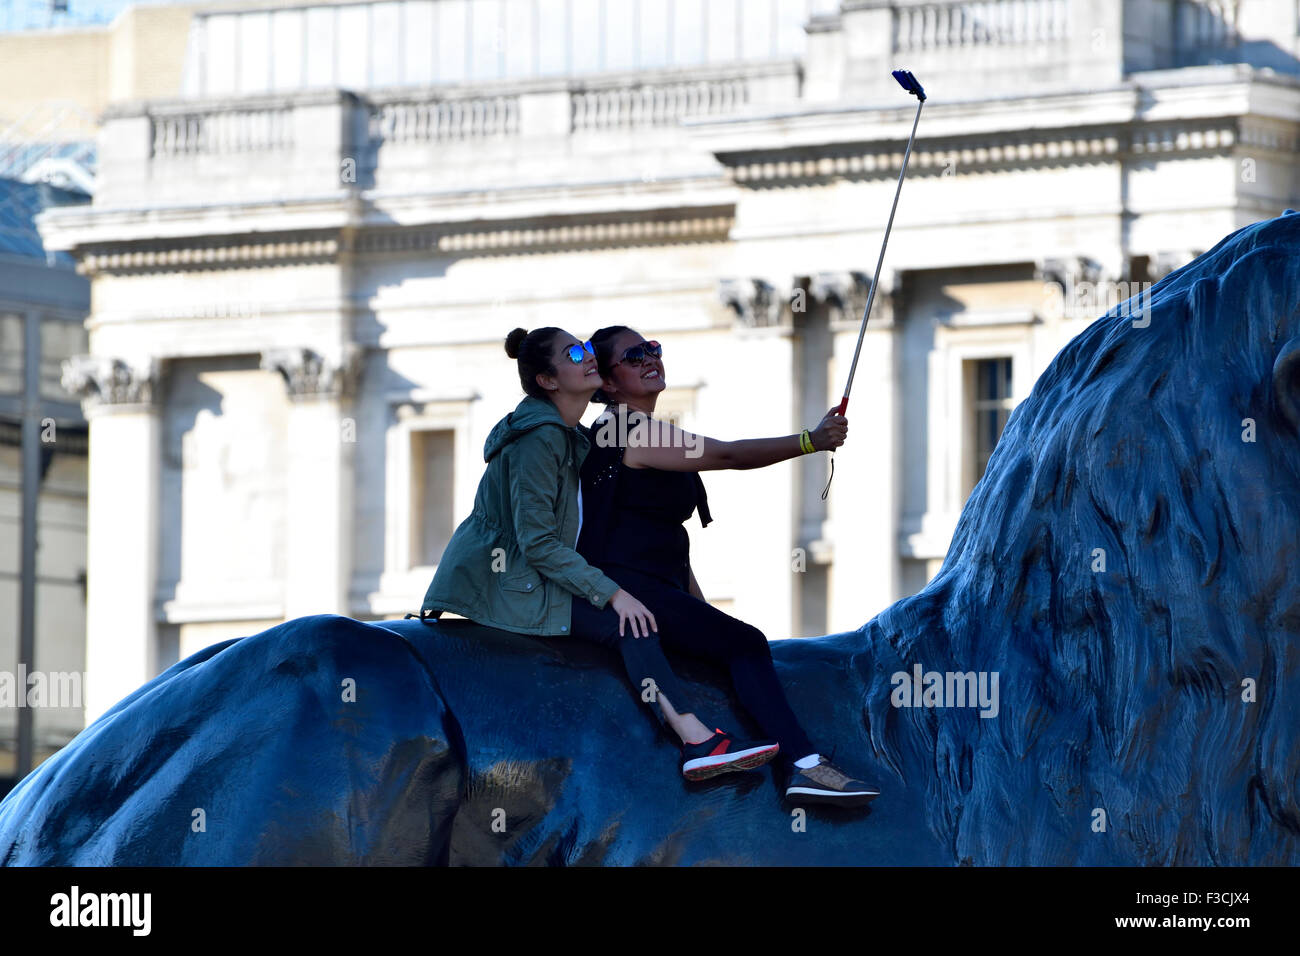 London, England, UK. Two young women sitting on a lion in Trafalgar Square taking a selfie Stock Photo